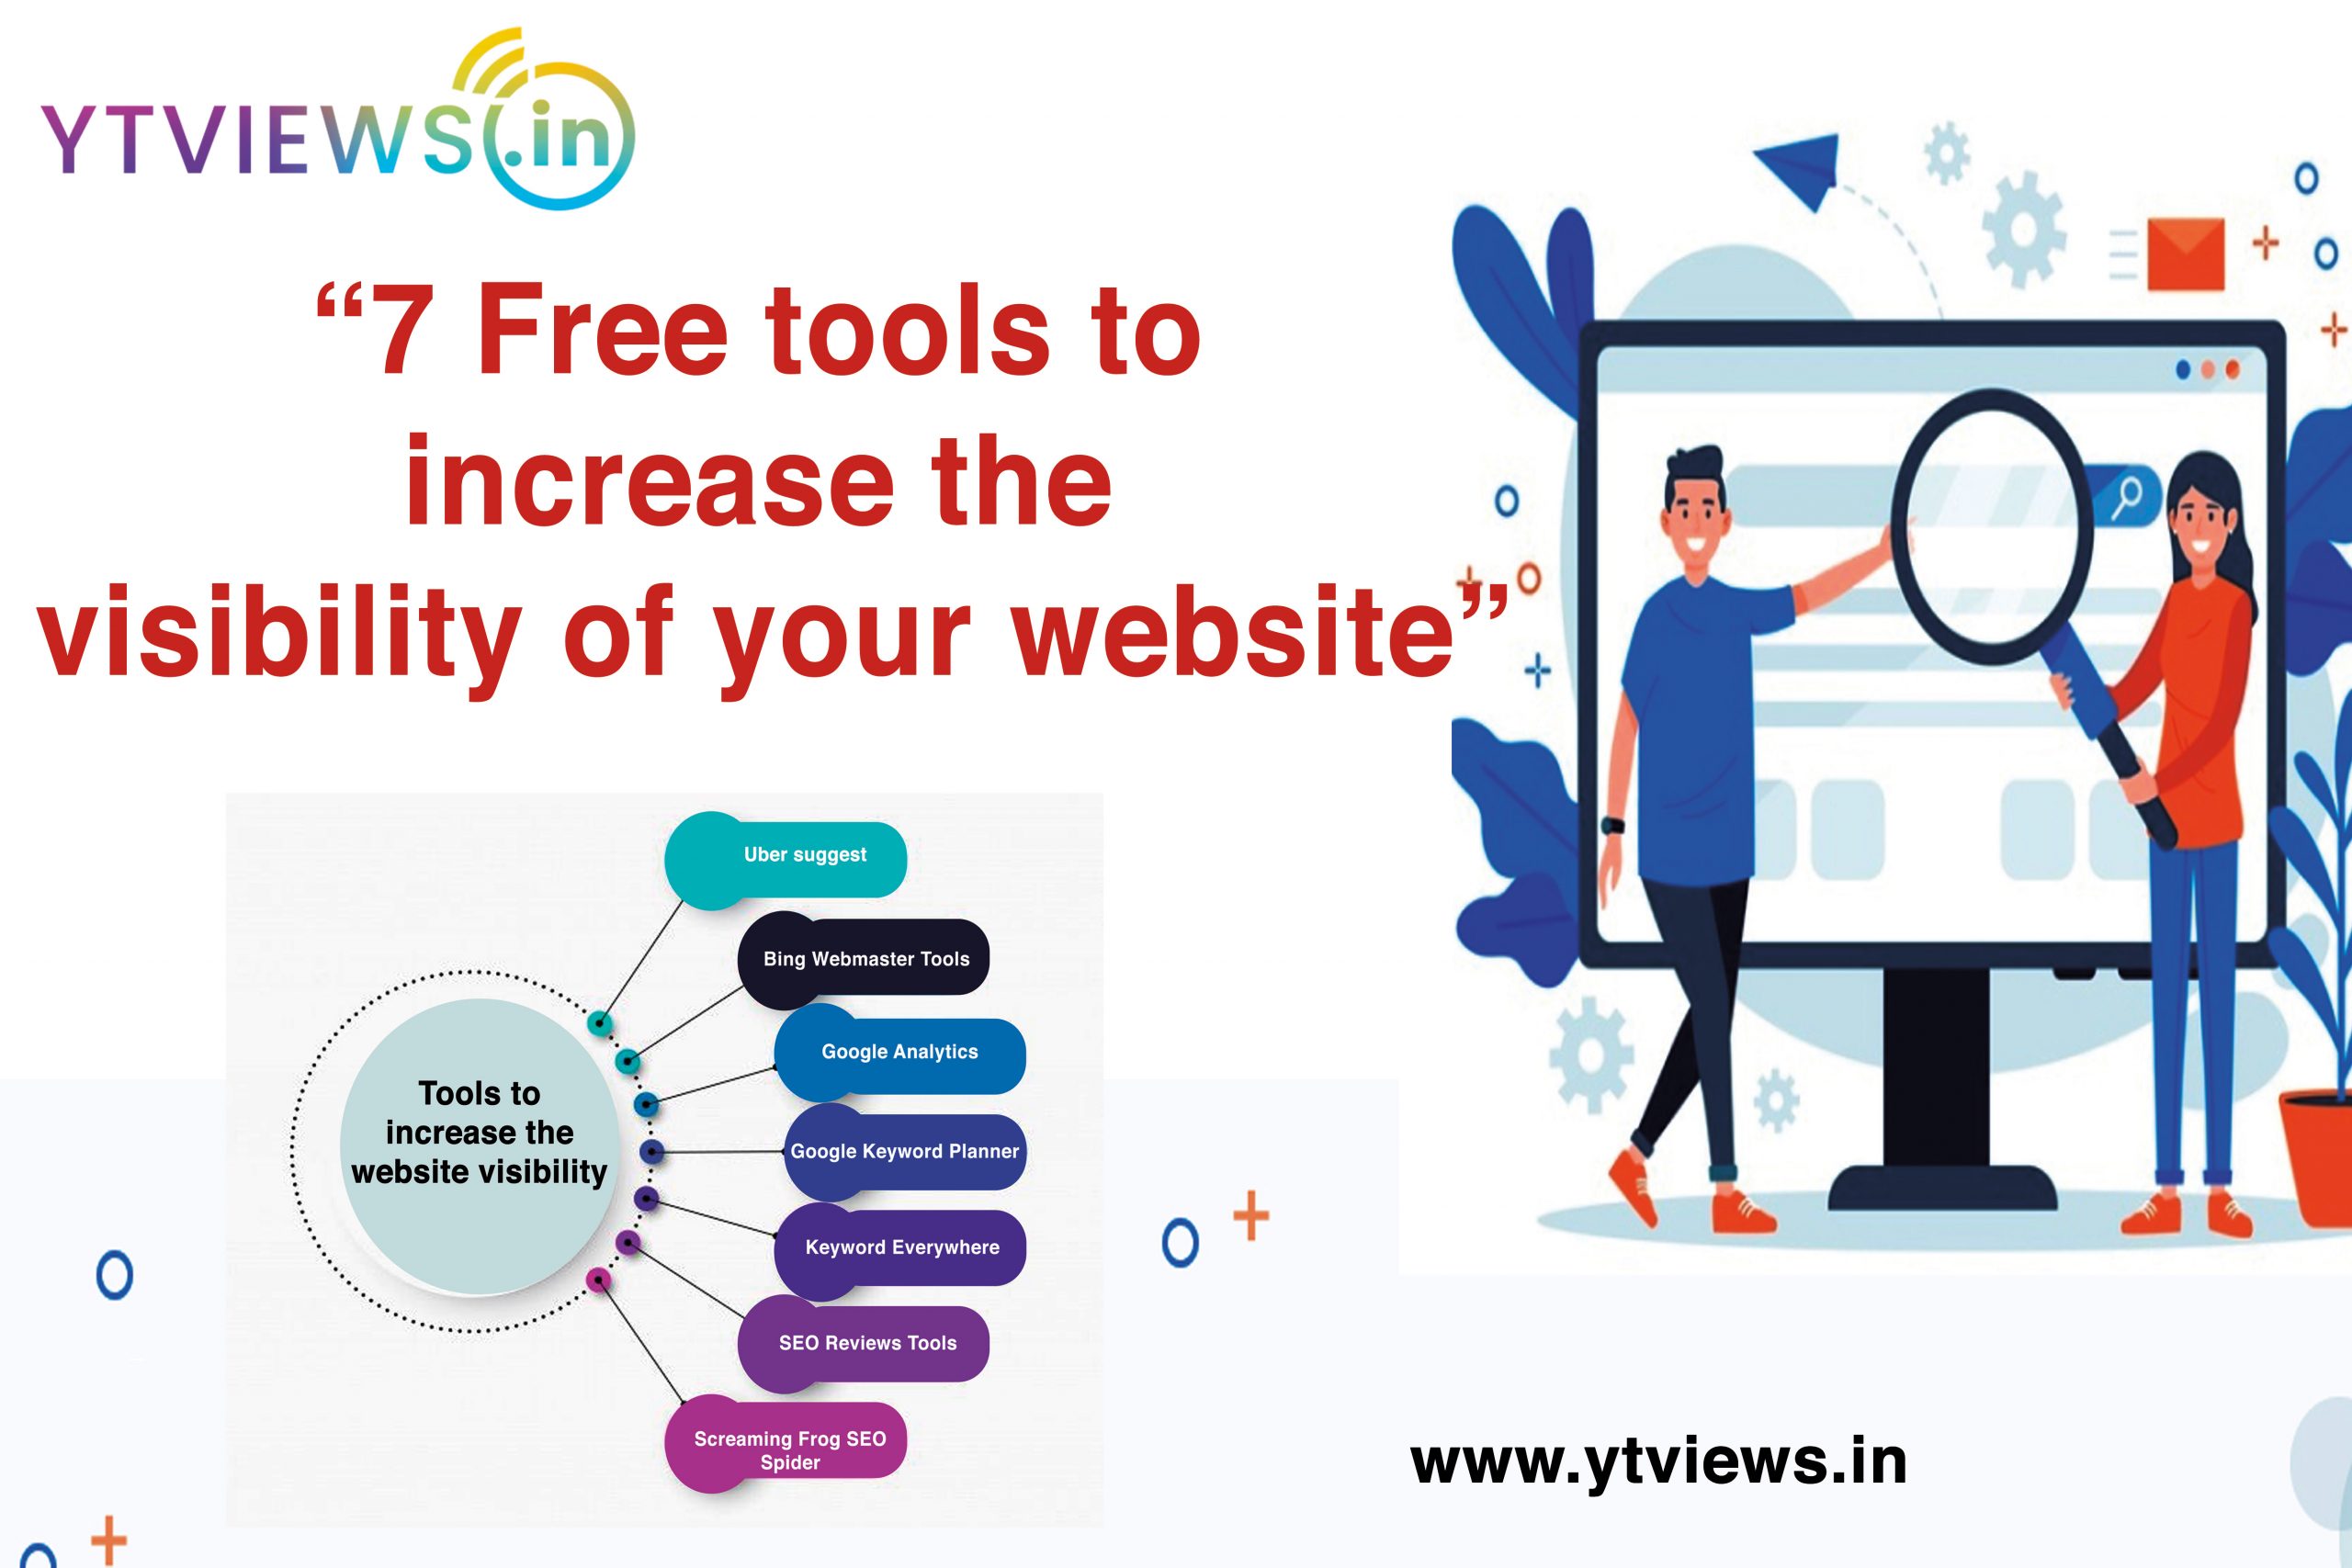 7 free tools to increase the visibility of your website.